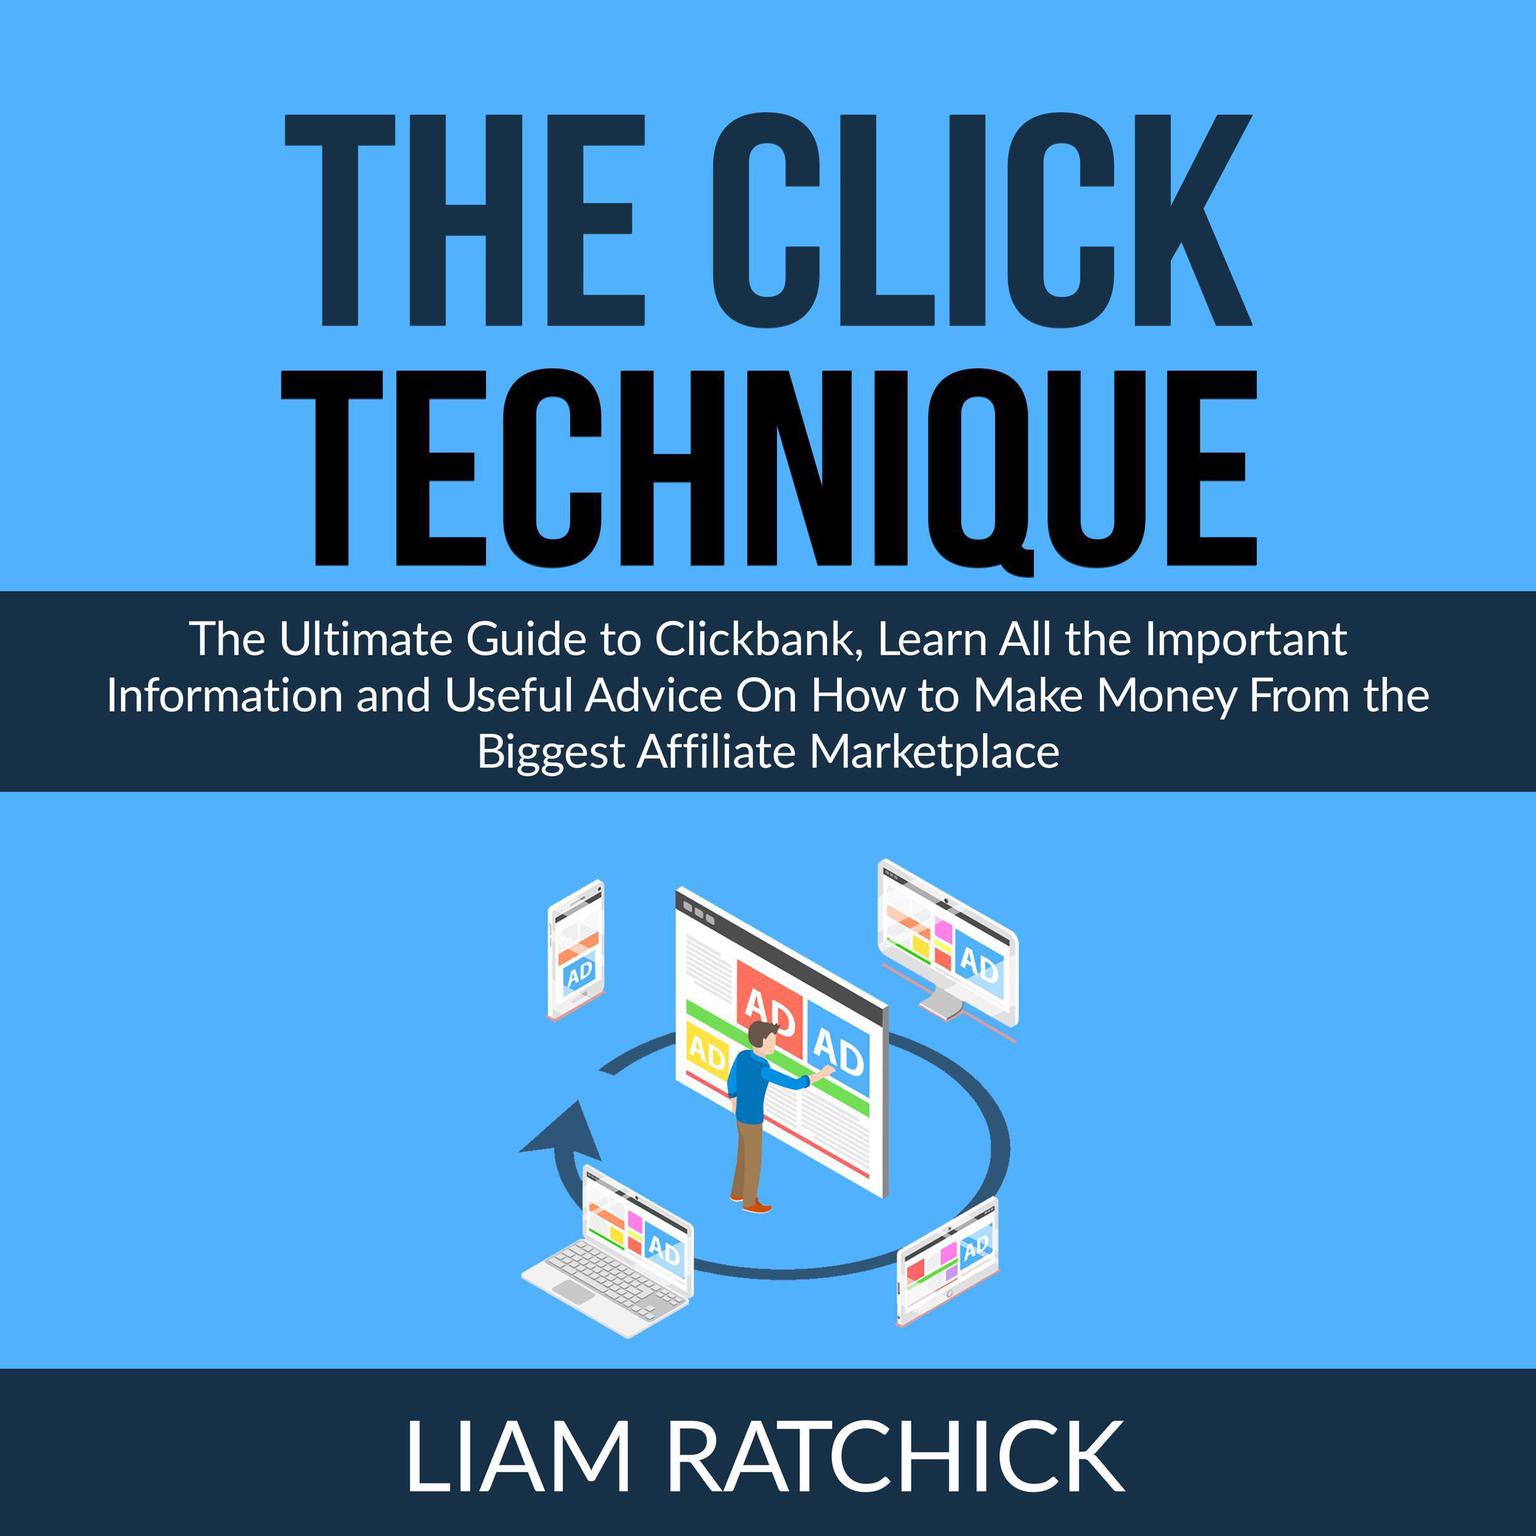 The CLICK Technique: The Ultimate Guide to Clickbank, Learn All the Important Information and Useful Advice on How to Make Money From the Biggest Affiliate Marketplace  Audiobook, by Liam Ratchick